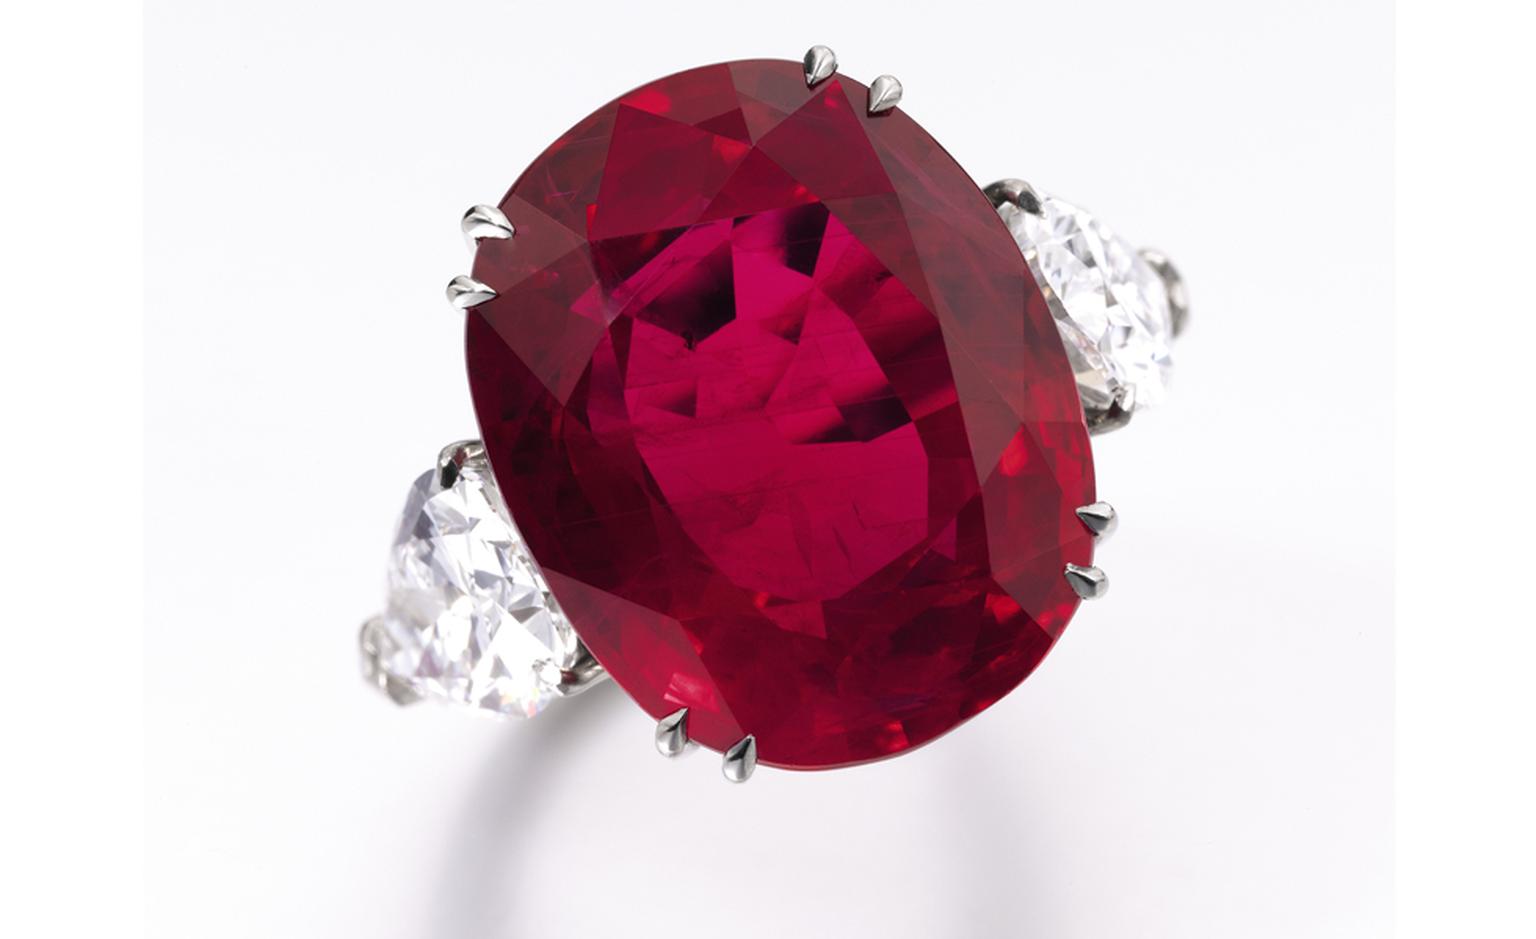 Lot 484. Spectacular ruby and diamond ring. Estimate CHF 1,850,000 - CHF 3,650,000. SOLD FOR CHF 3,778,500